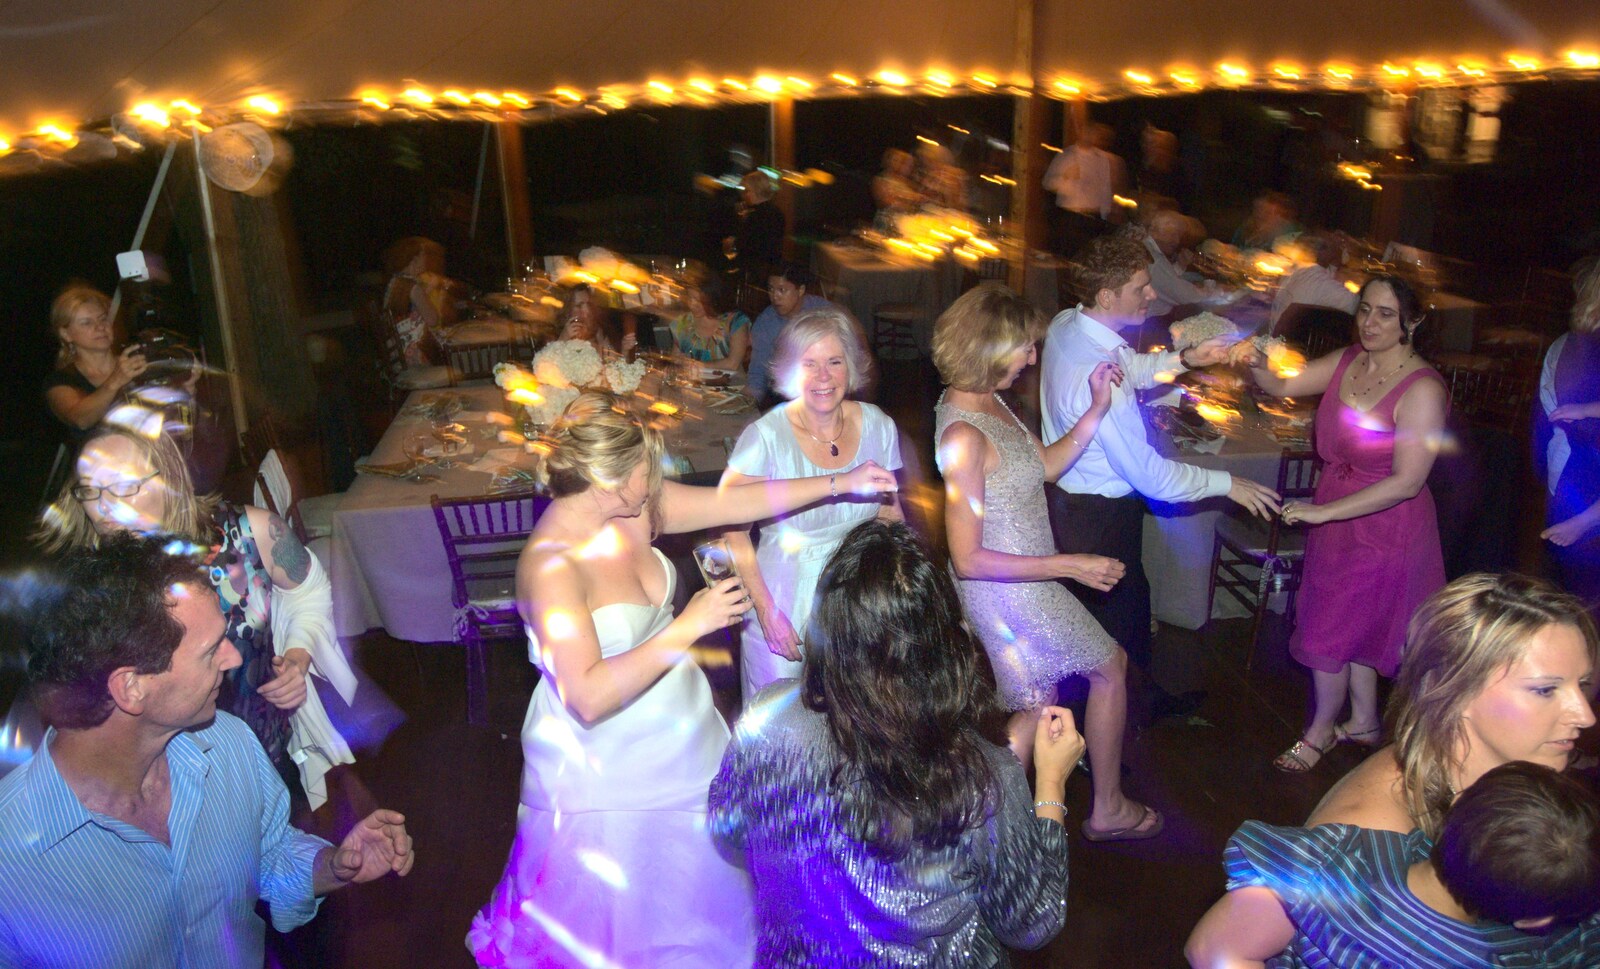 Crazy dancing from Phil and Tania's Wedding, Short Hills, New Jersey, USA - 20th August 2011